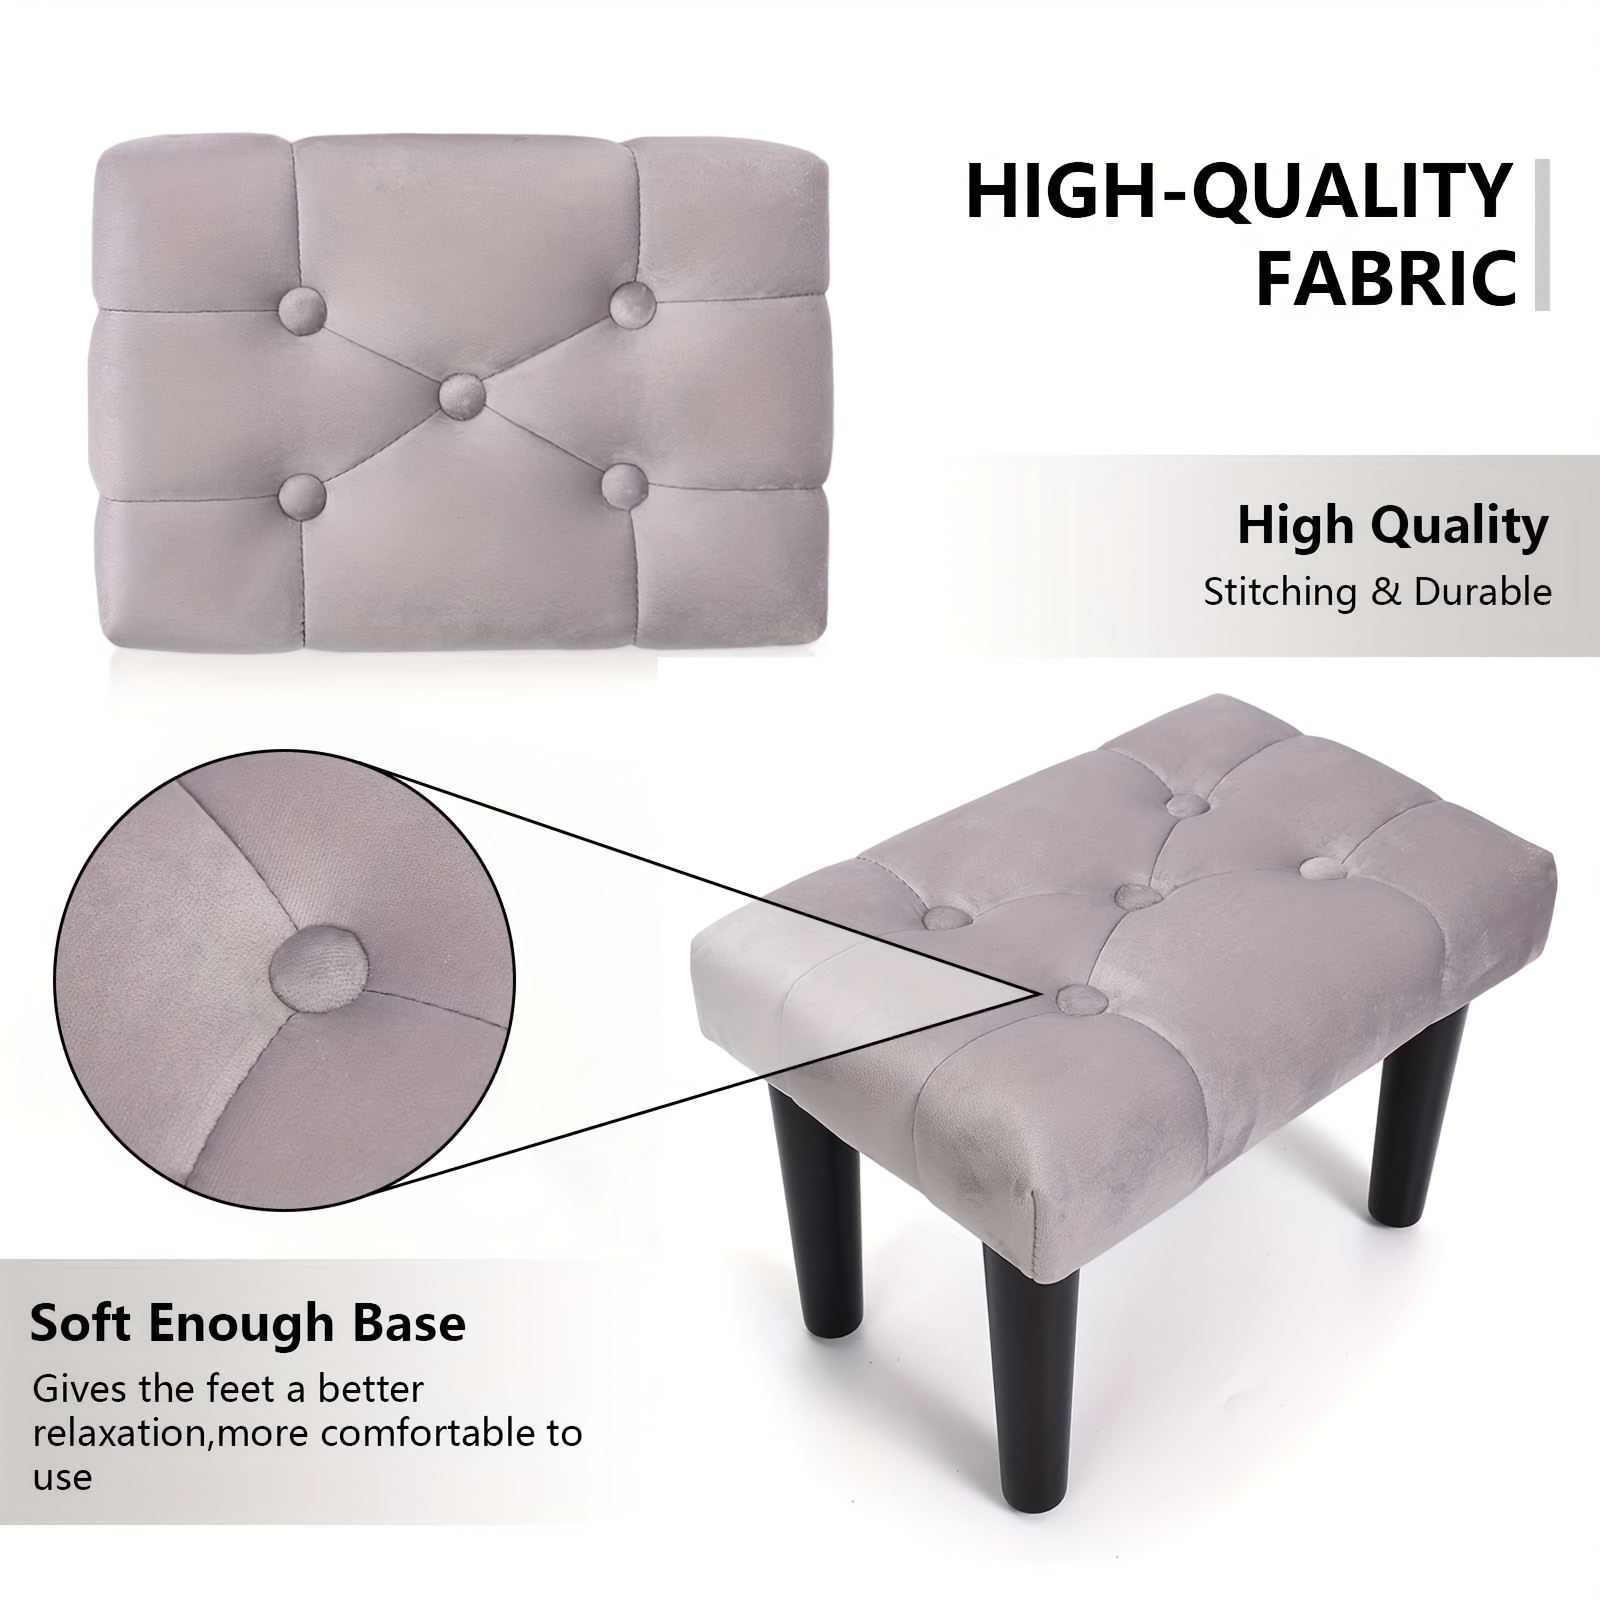 Luxury Modern Upholstered Soft 4 Wood Legs Foot Low Stool Cotton